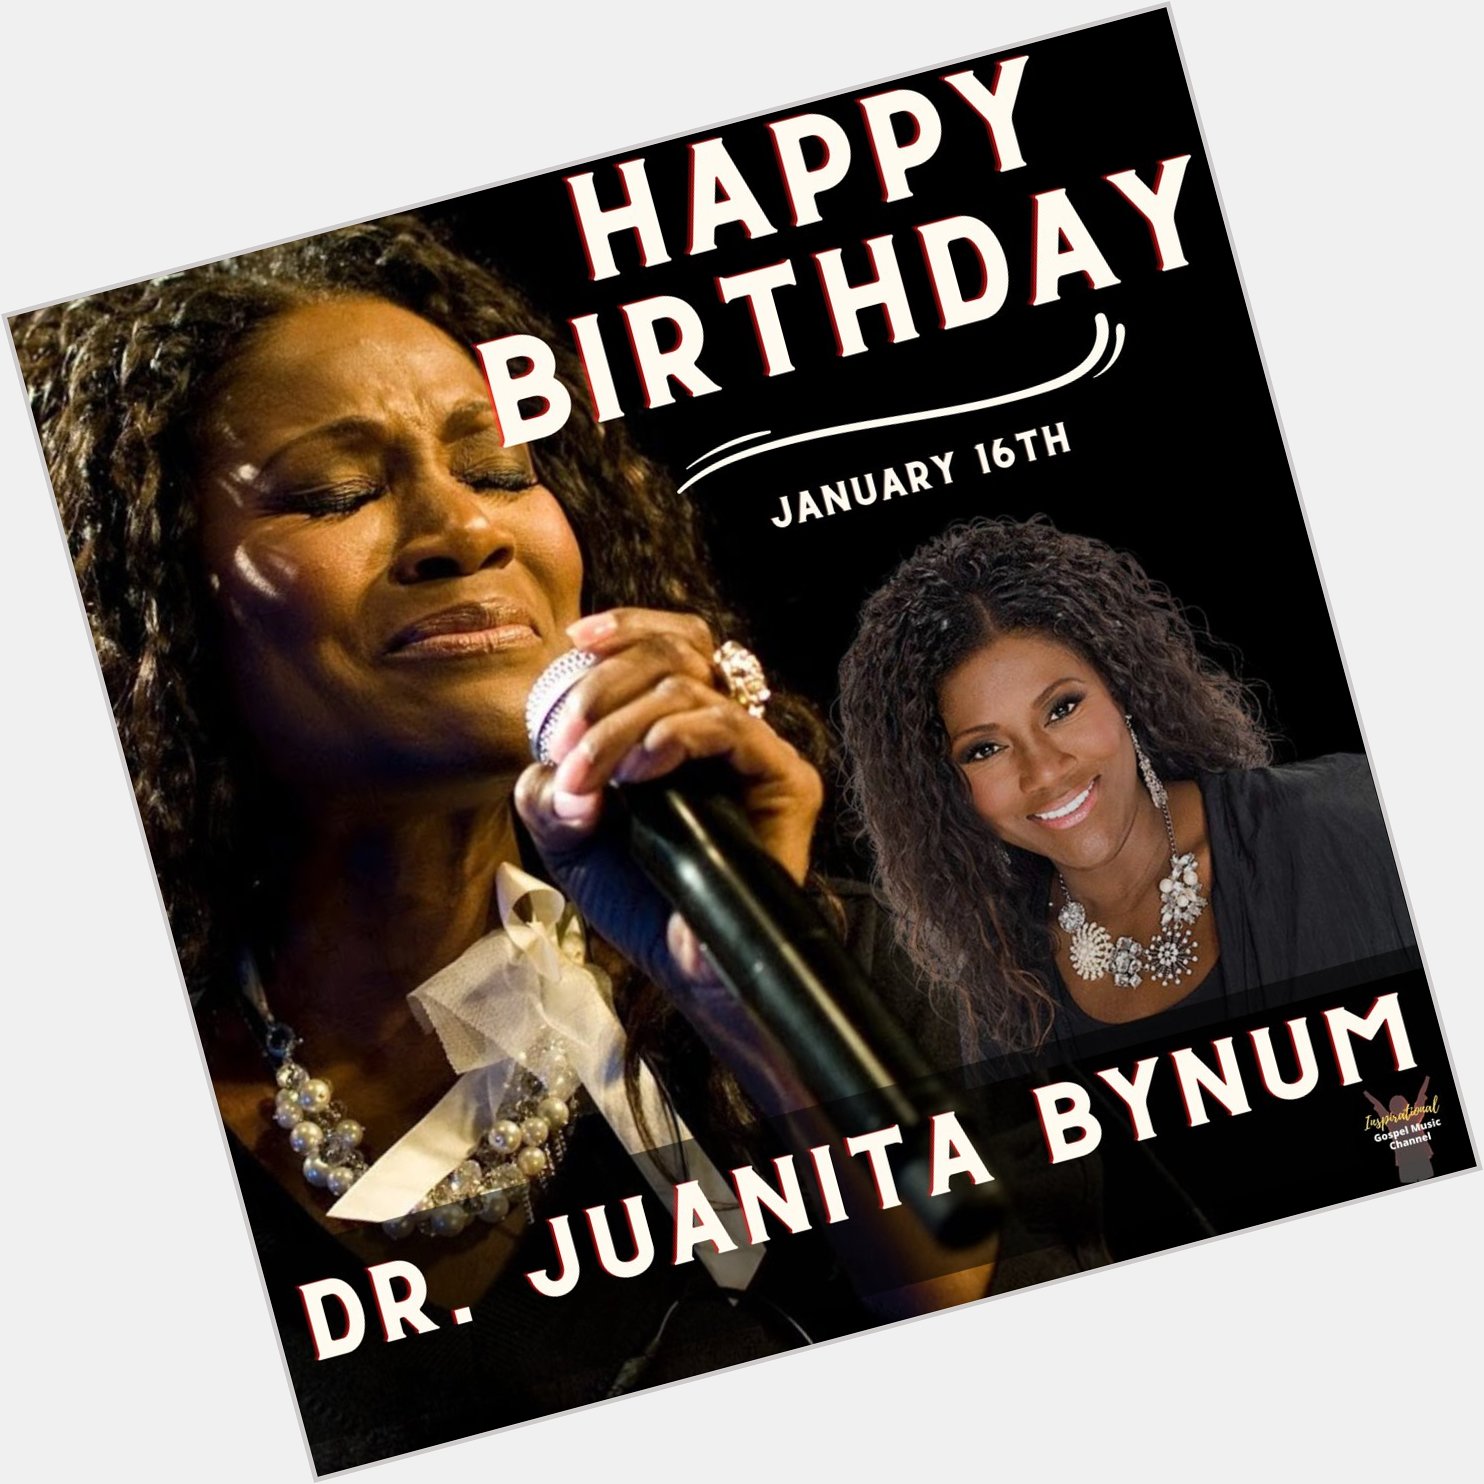 Happy Birthday to Dr. Juanita Bynum! May God continue to bless you and your ministry! 